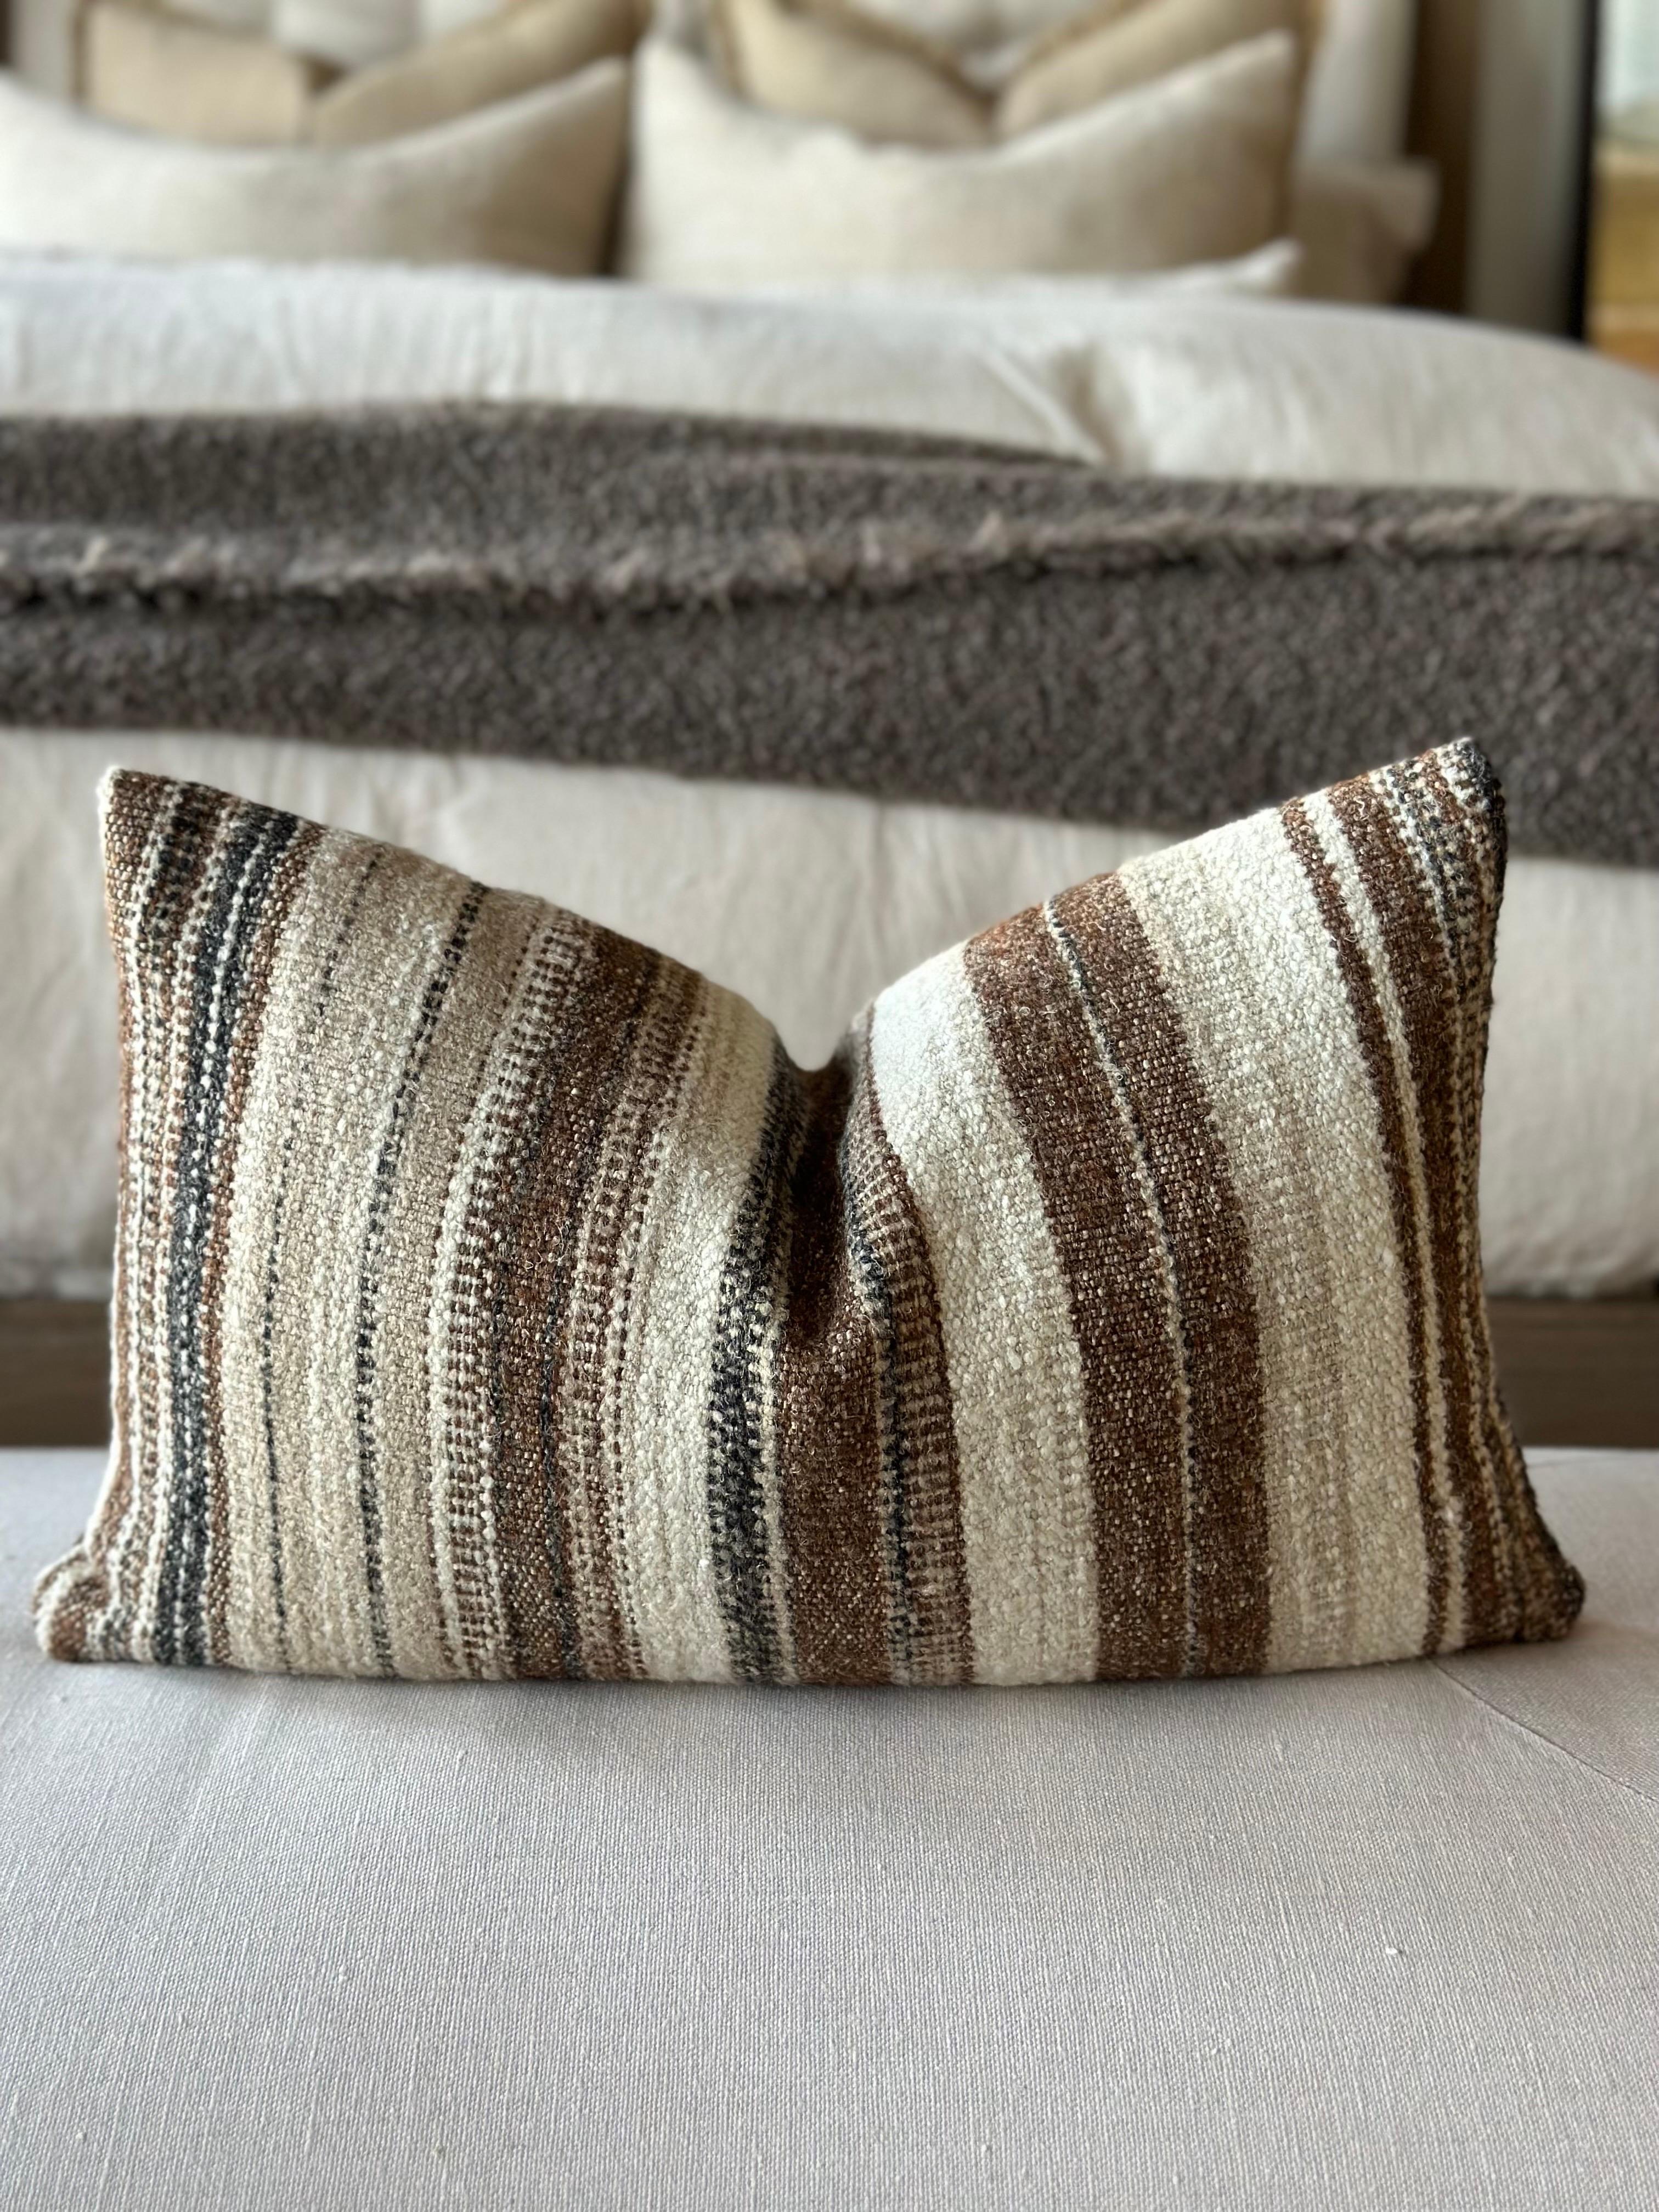 Woven in Belgium using traditional weaving techniques, Nagy 10 combines Belgian linen with soft viscose. The slub like yarns alternating color along the warp create an inspired stripe from vintage textiles with some vibrant variations.
Color: Brown